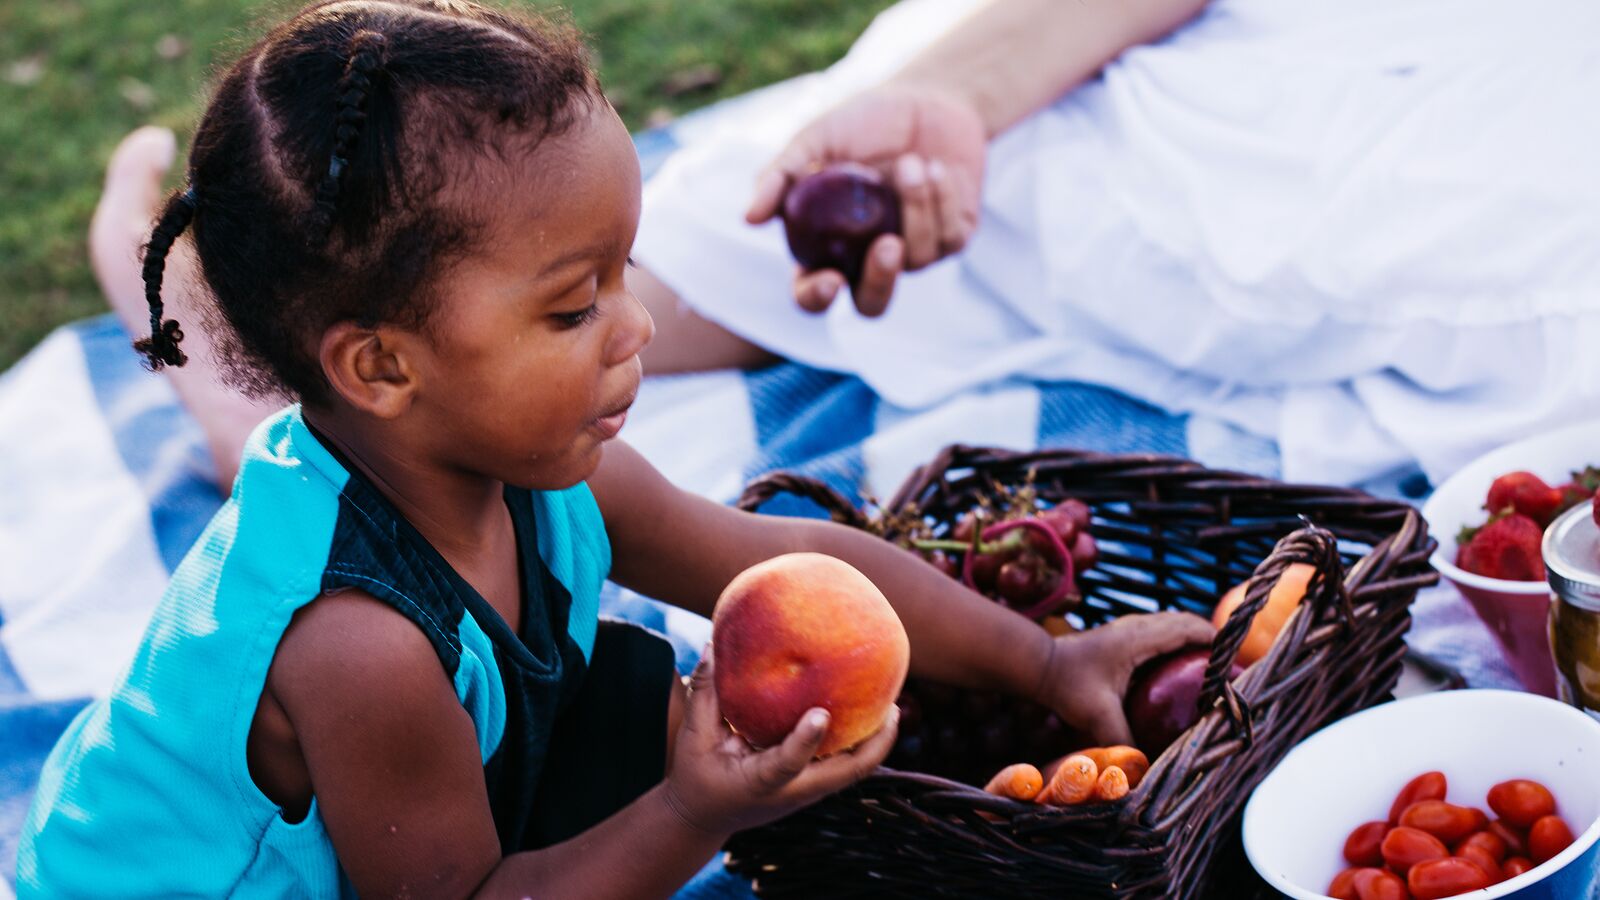 A child enjoys healthy peaches purchased at a farmer's market in Austin